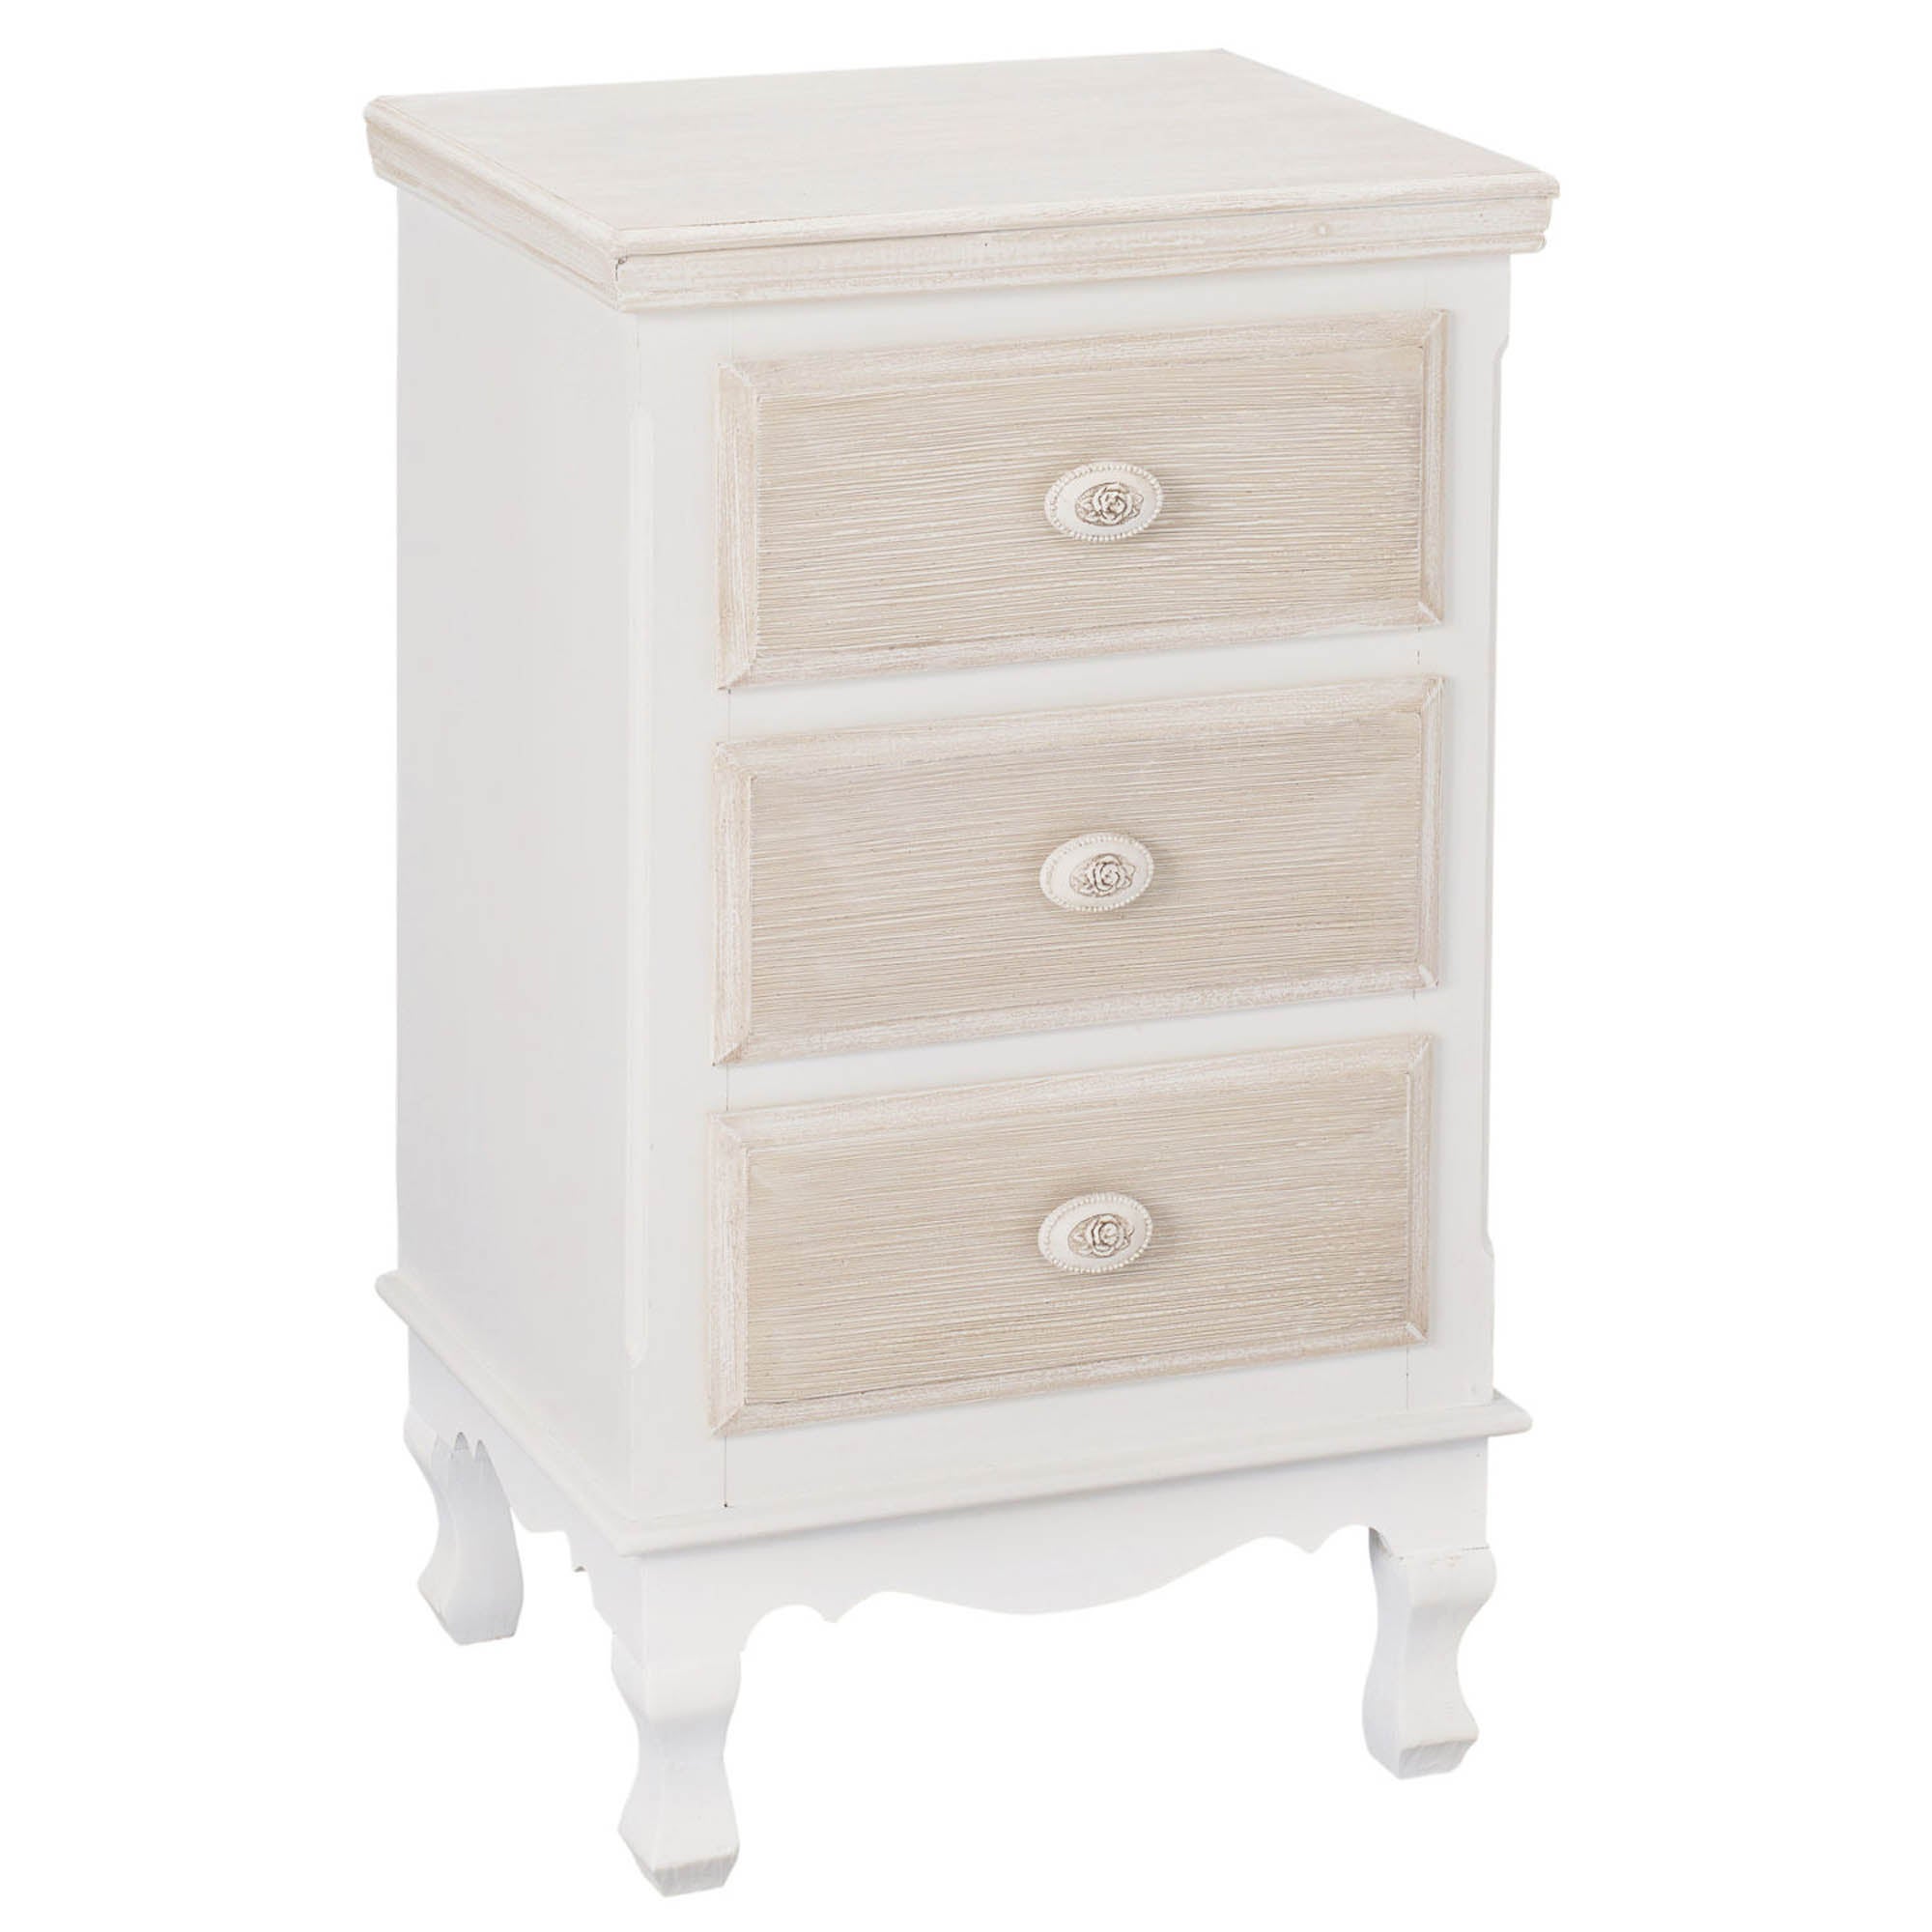 Jule 3 Drawer Bedside Table, White White/Brown